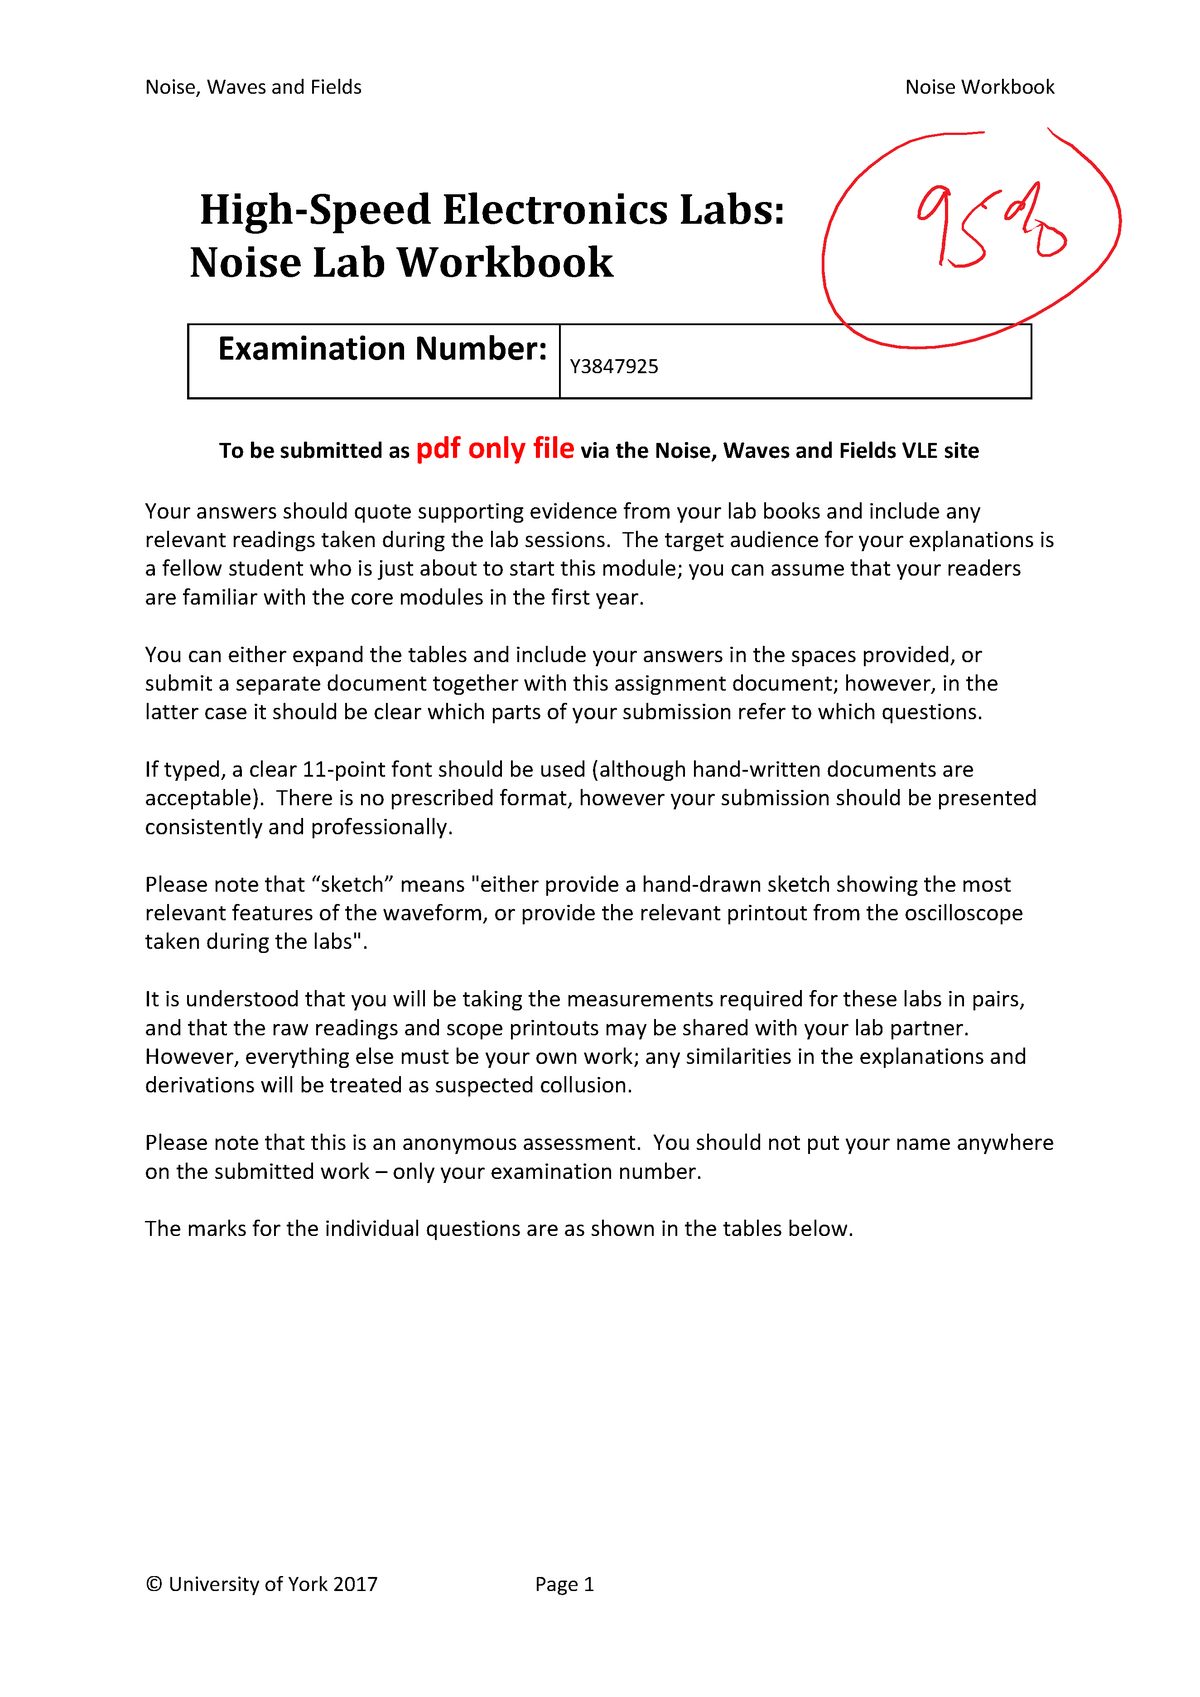 High-Speed Electronics Labs: Noise Lab Workbook - Marked and annotated